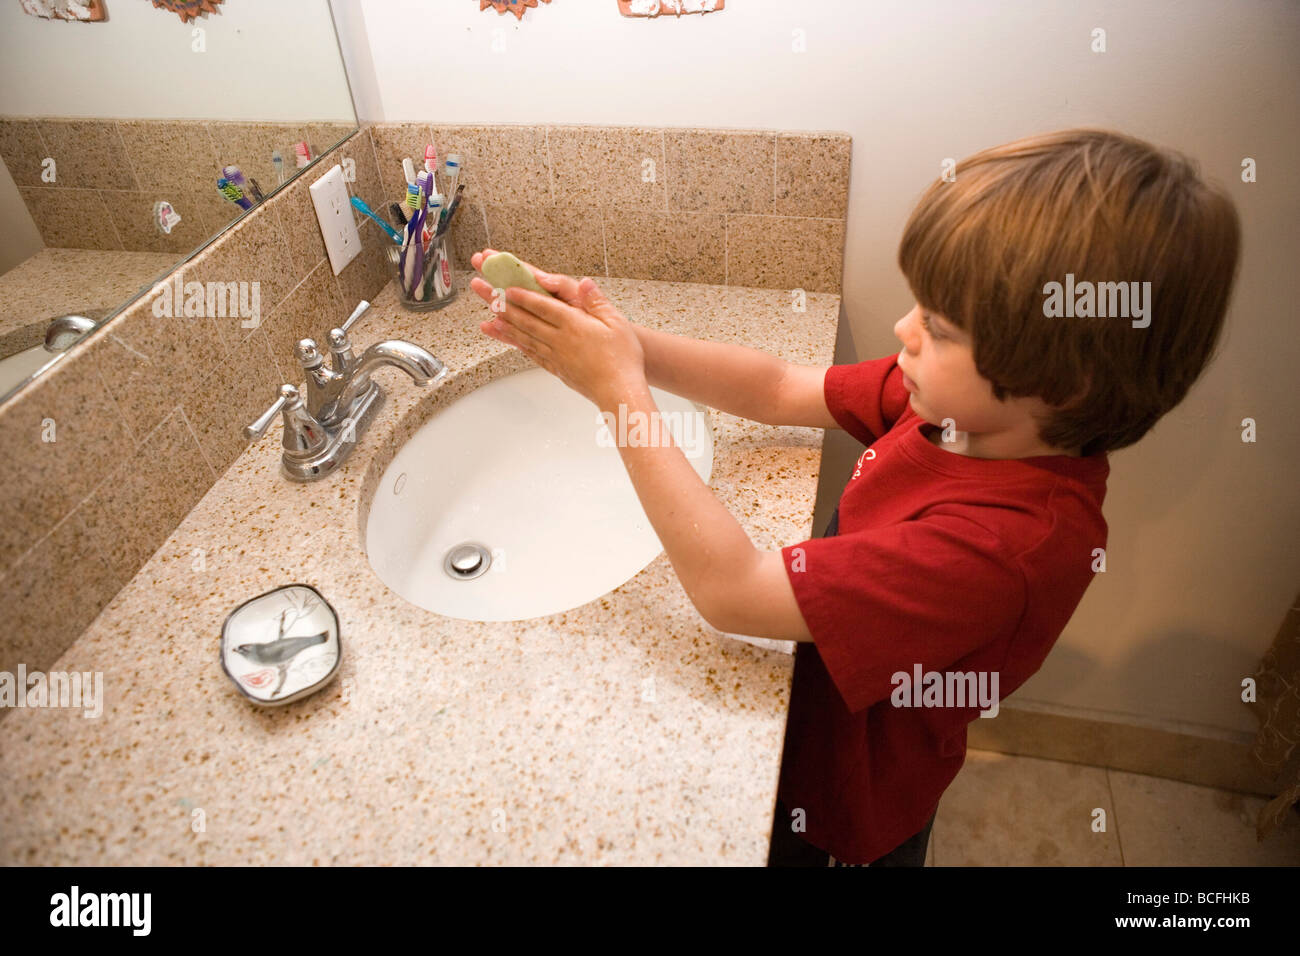 a seven year old boy washing his hands with soap in the bathroom sink at home Stock Photo